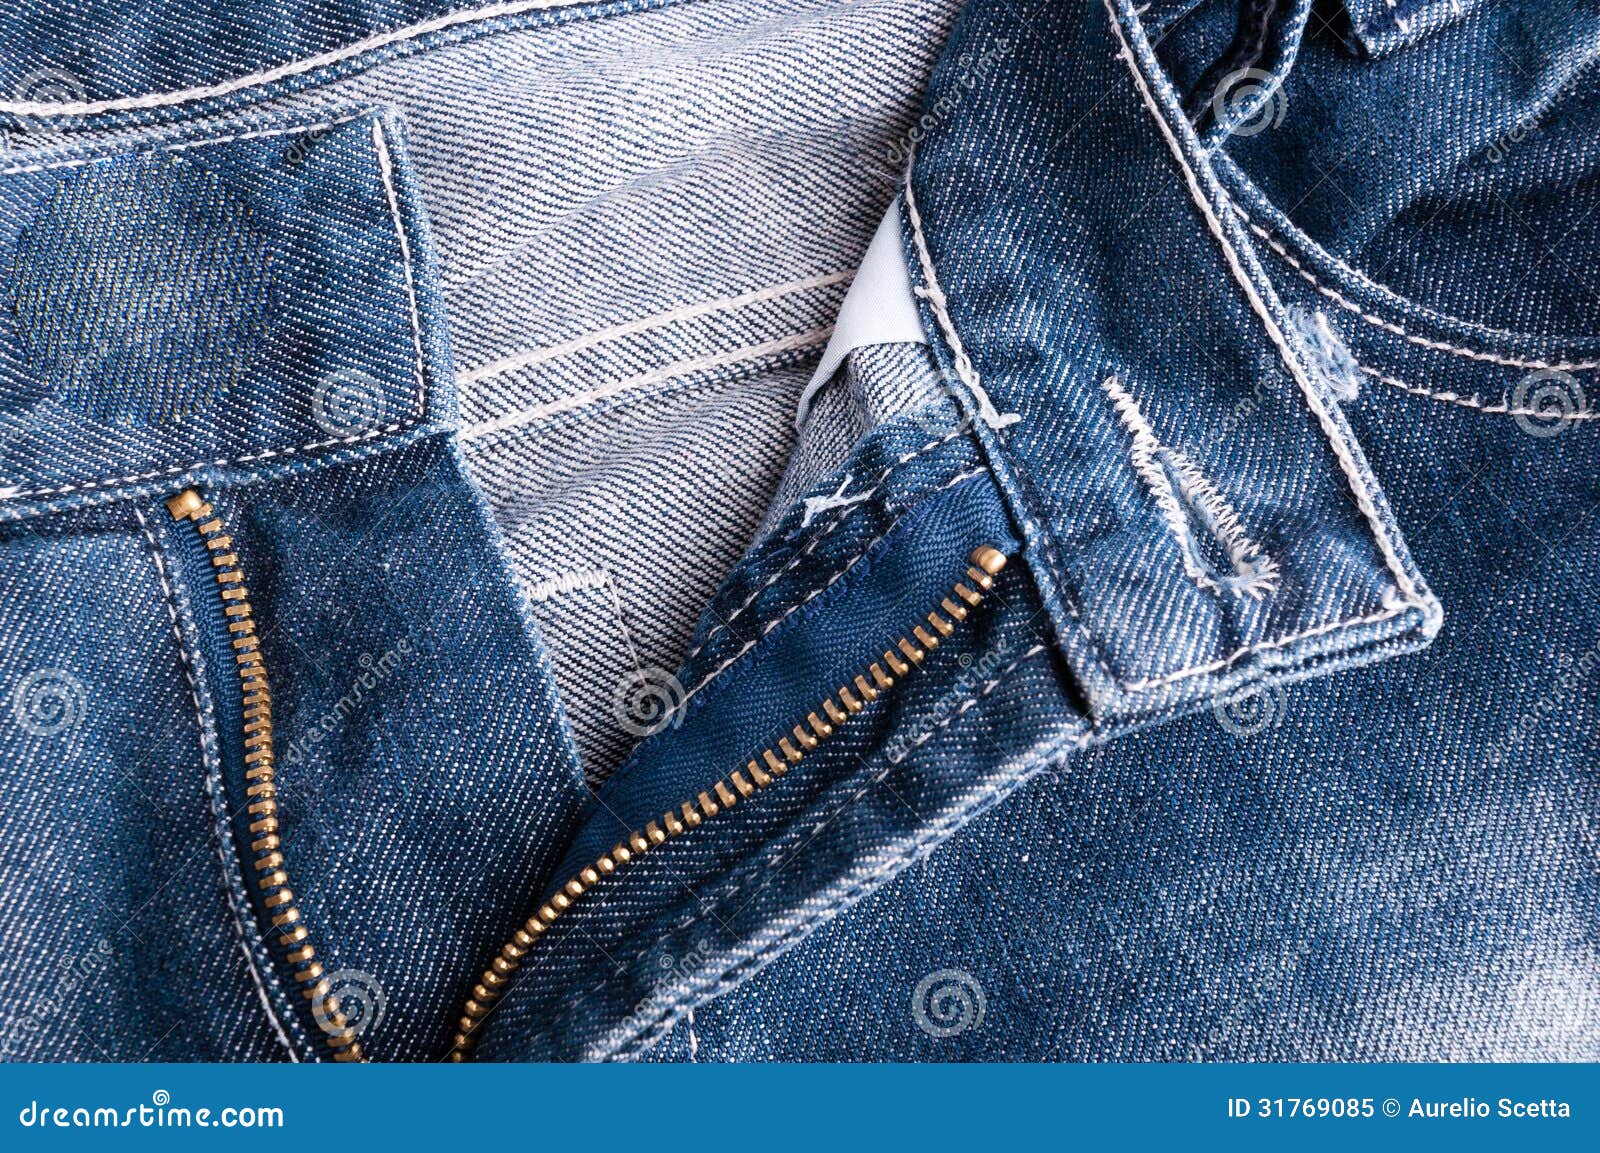 Pants With Zipper Open Royalty Free Stock Photo - Image: 31769085